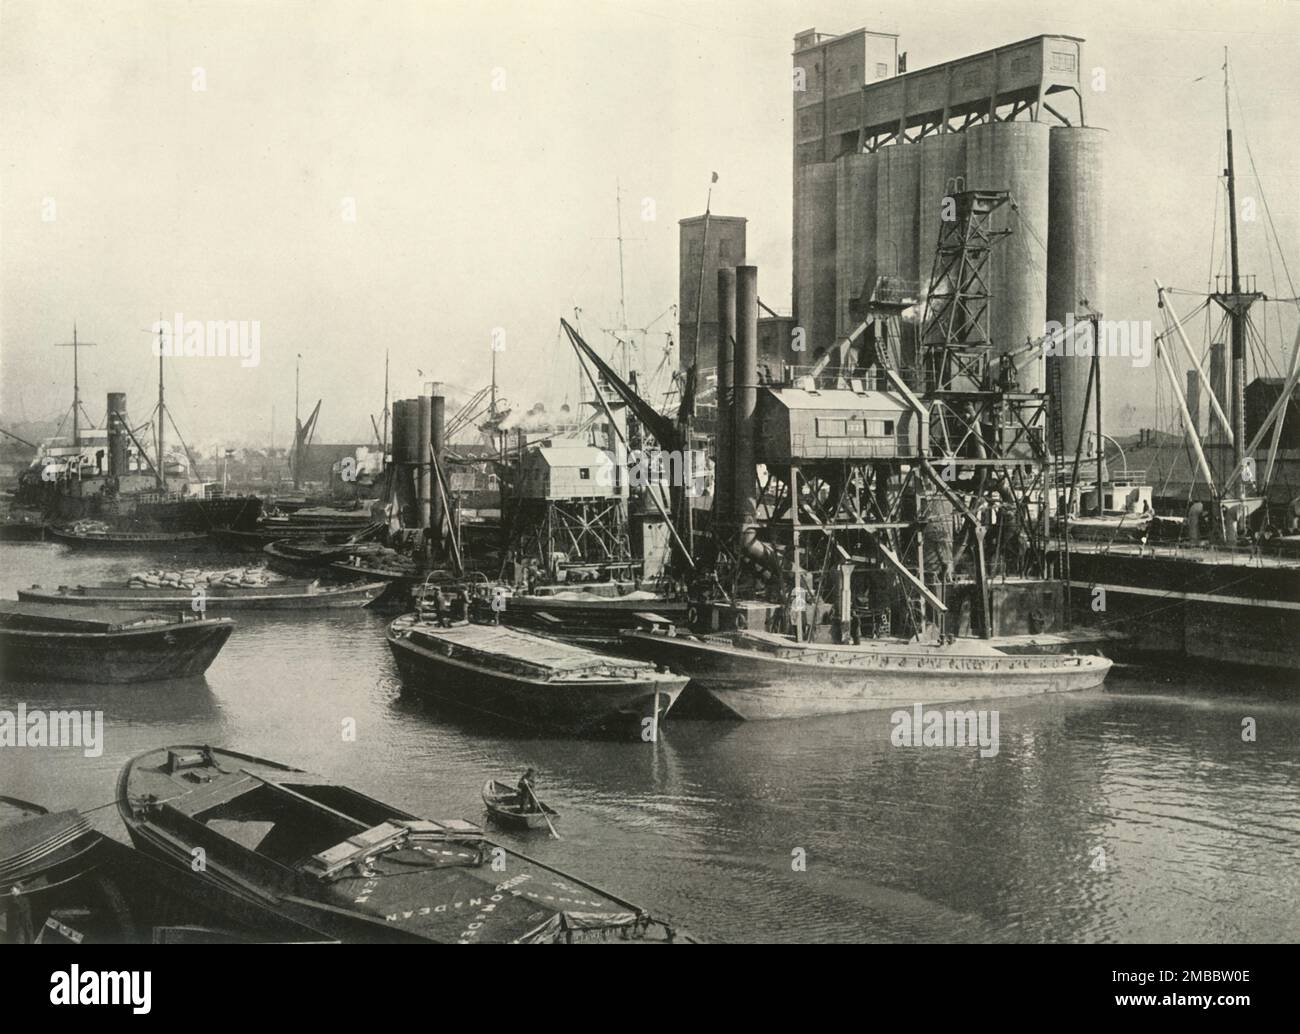 &quot;Factories, Refineries, Granaries Grow Thick&quot; Ship Discharging Grain by Floating Pneumatic Elevators and Into Quayside Mill at Millwall Dock', 1937. Industrial scene on the River Thames in London. From &quot;The Said Noble River&quot;, by Alan Bell. [The Port of London Authority, London, 1937] Stock Photo